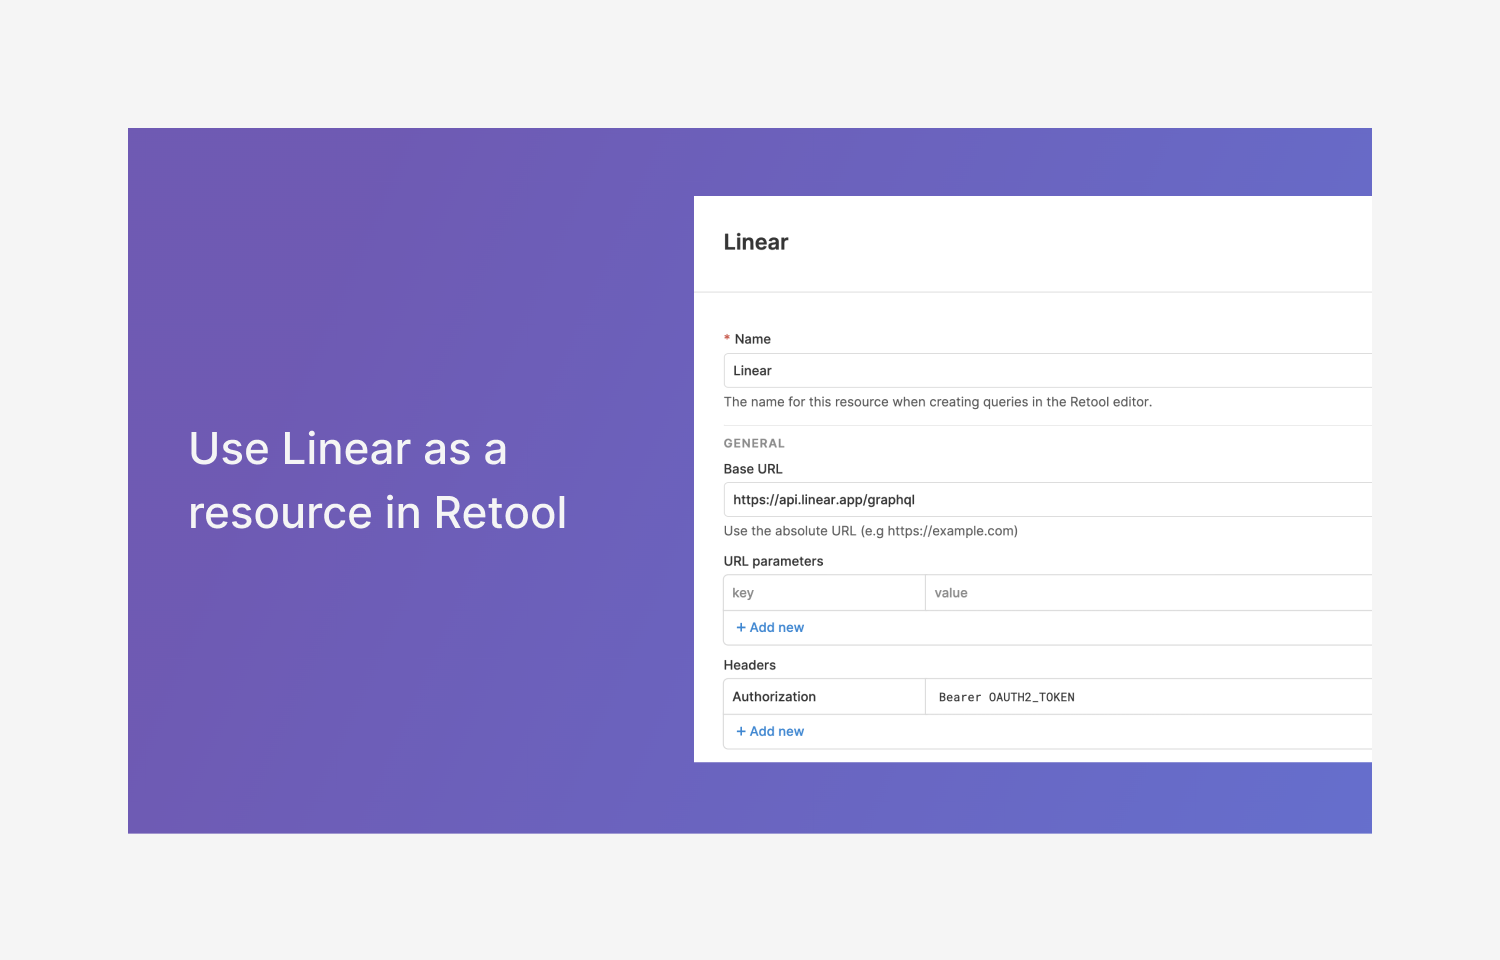 Use Linear as a resource in Retool.